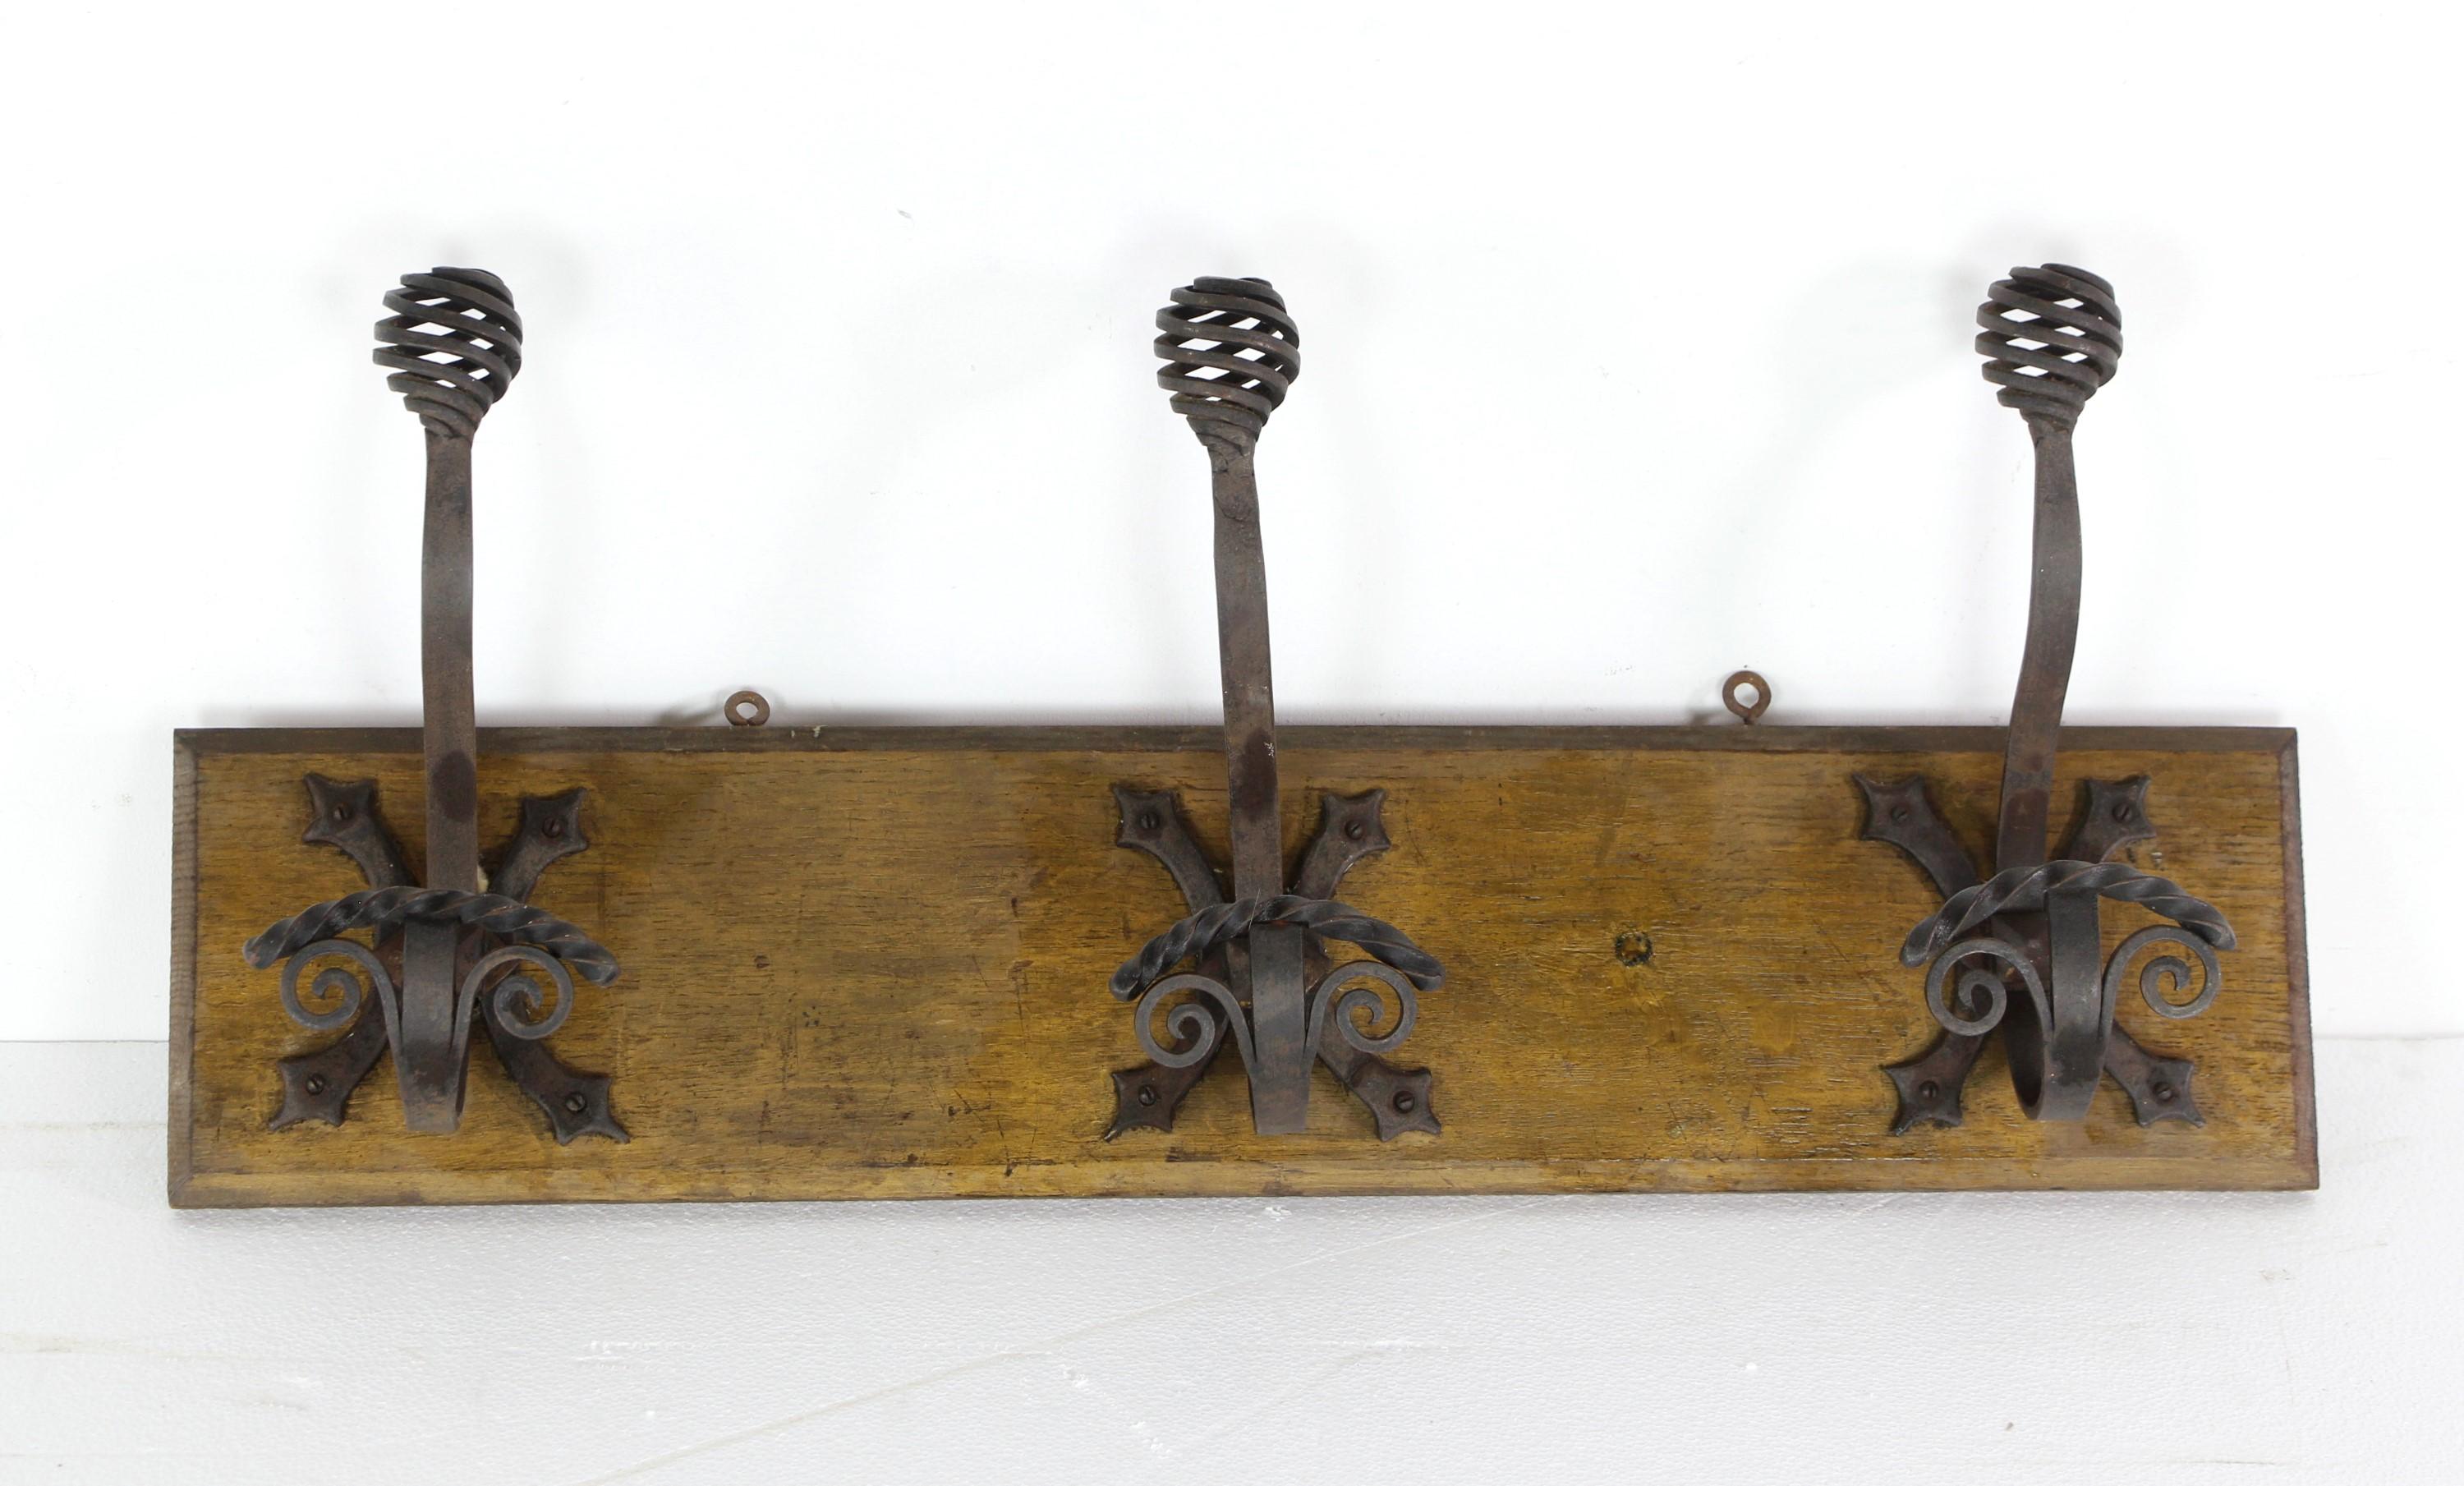 European wall rack featuring three curled wrought iron hooks mounted on a wood base. This piece combines traditional wrought iron craftsmanship with a touch of European charm, providing a functional and decorative solution for hanging items in